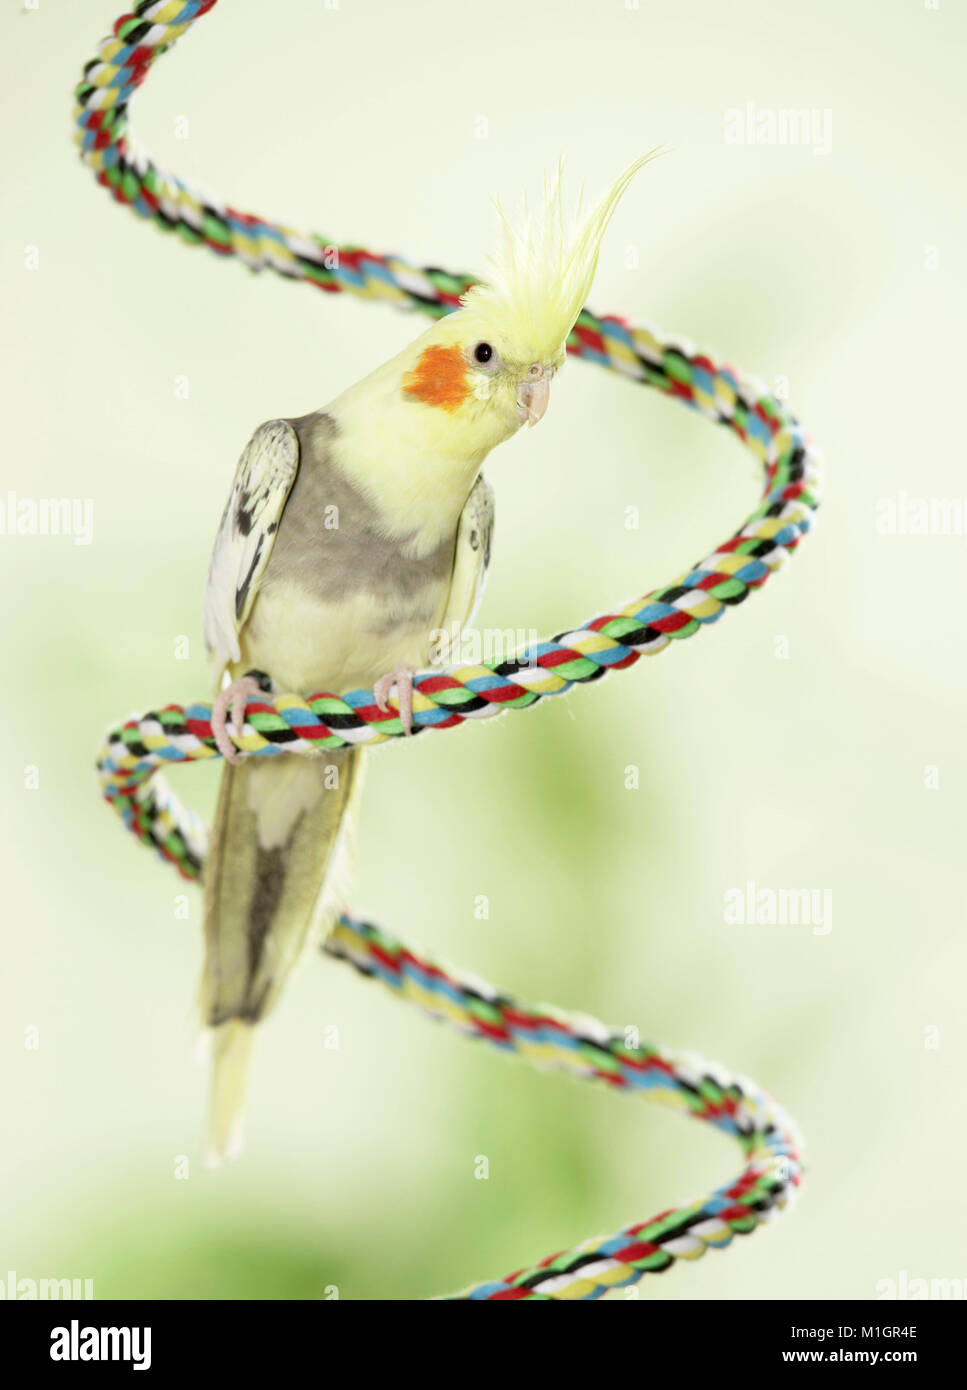 Cockatiel. Adult perched on multicolored rope. Germany. Stock Photo